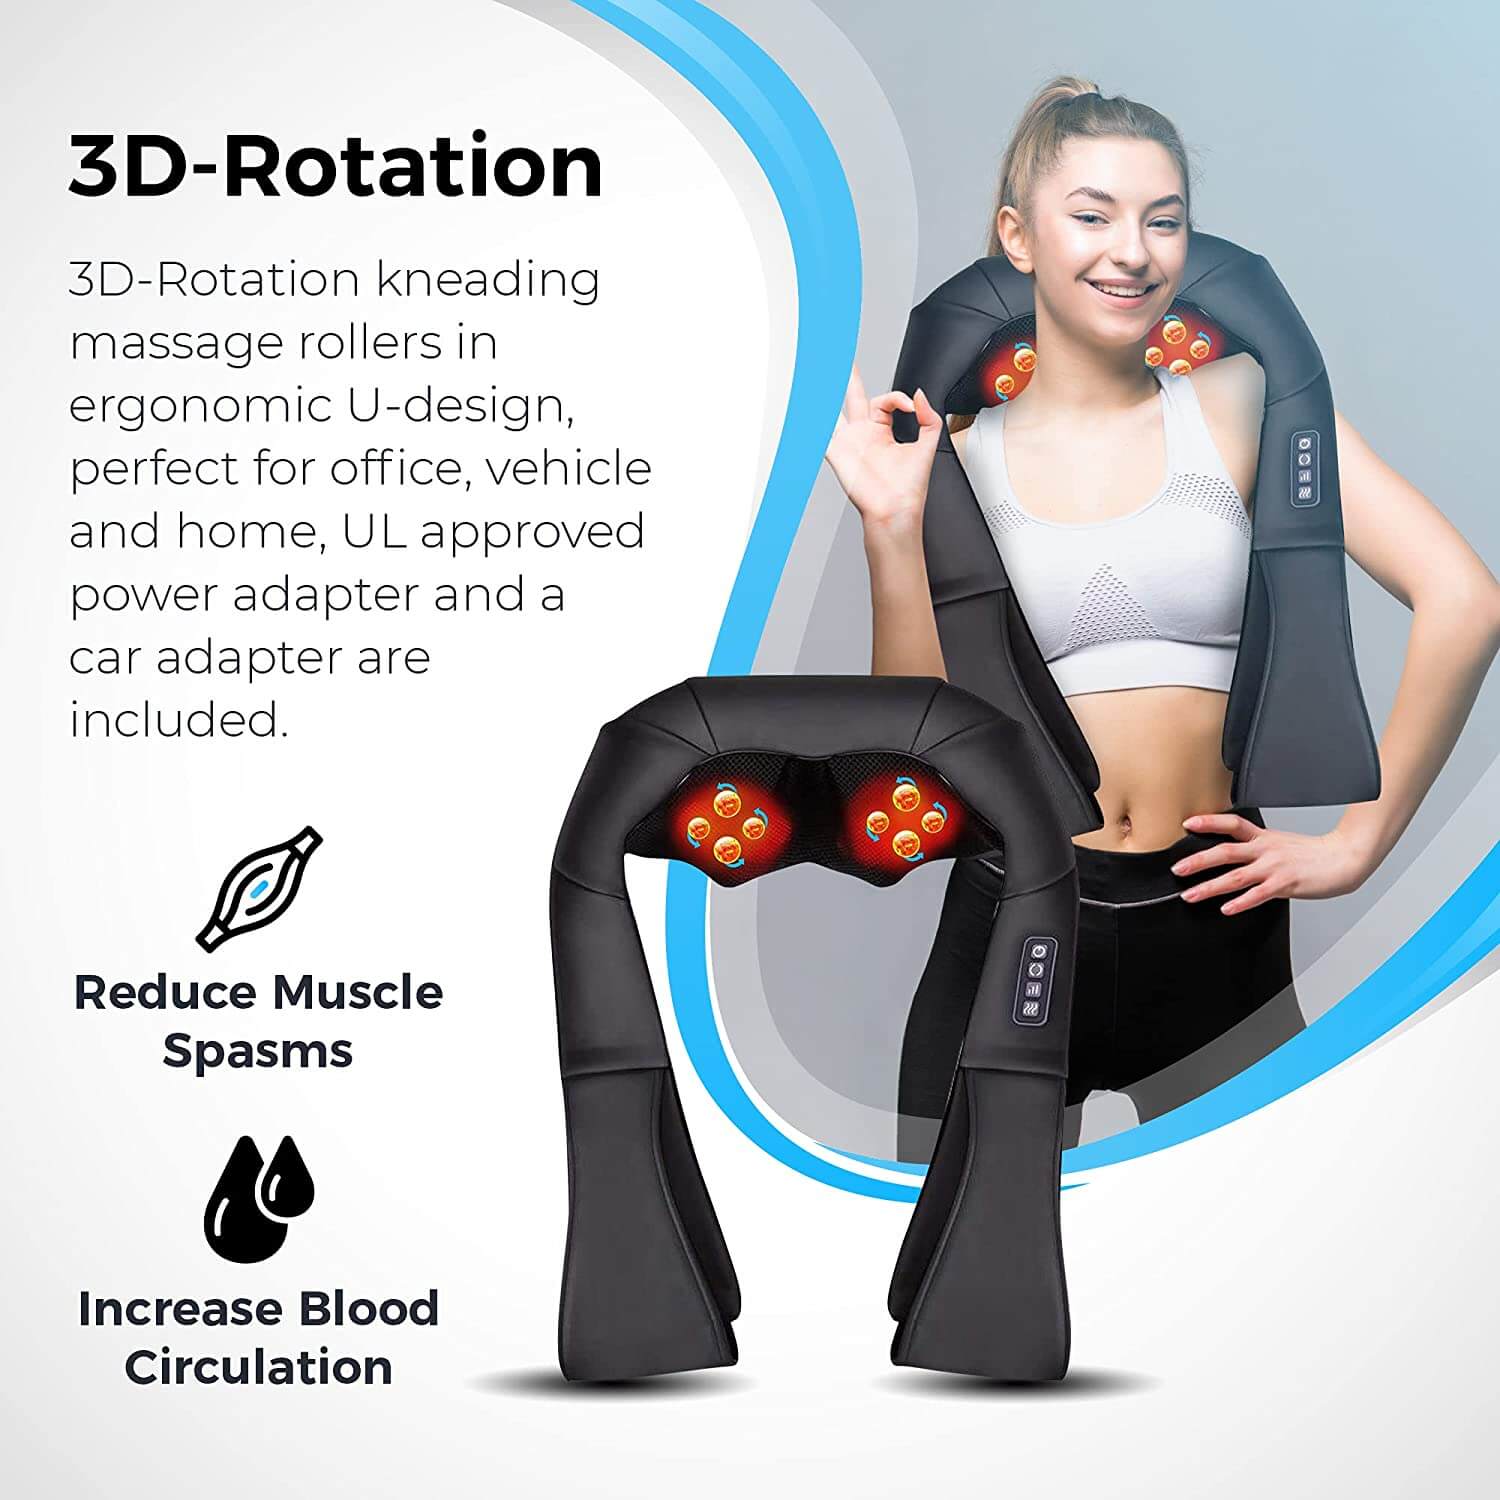  Shiatsu Neck and Back Massager - 8 Heated Rollers